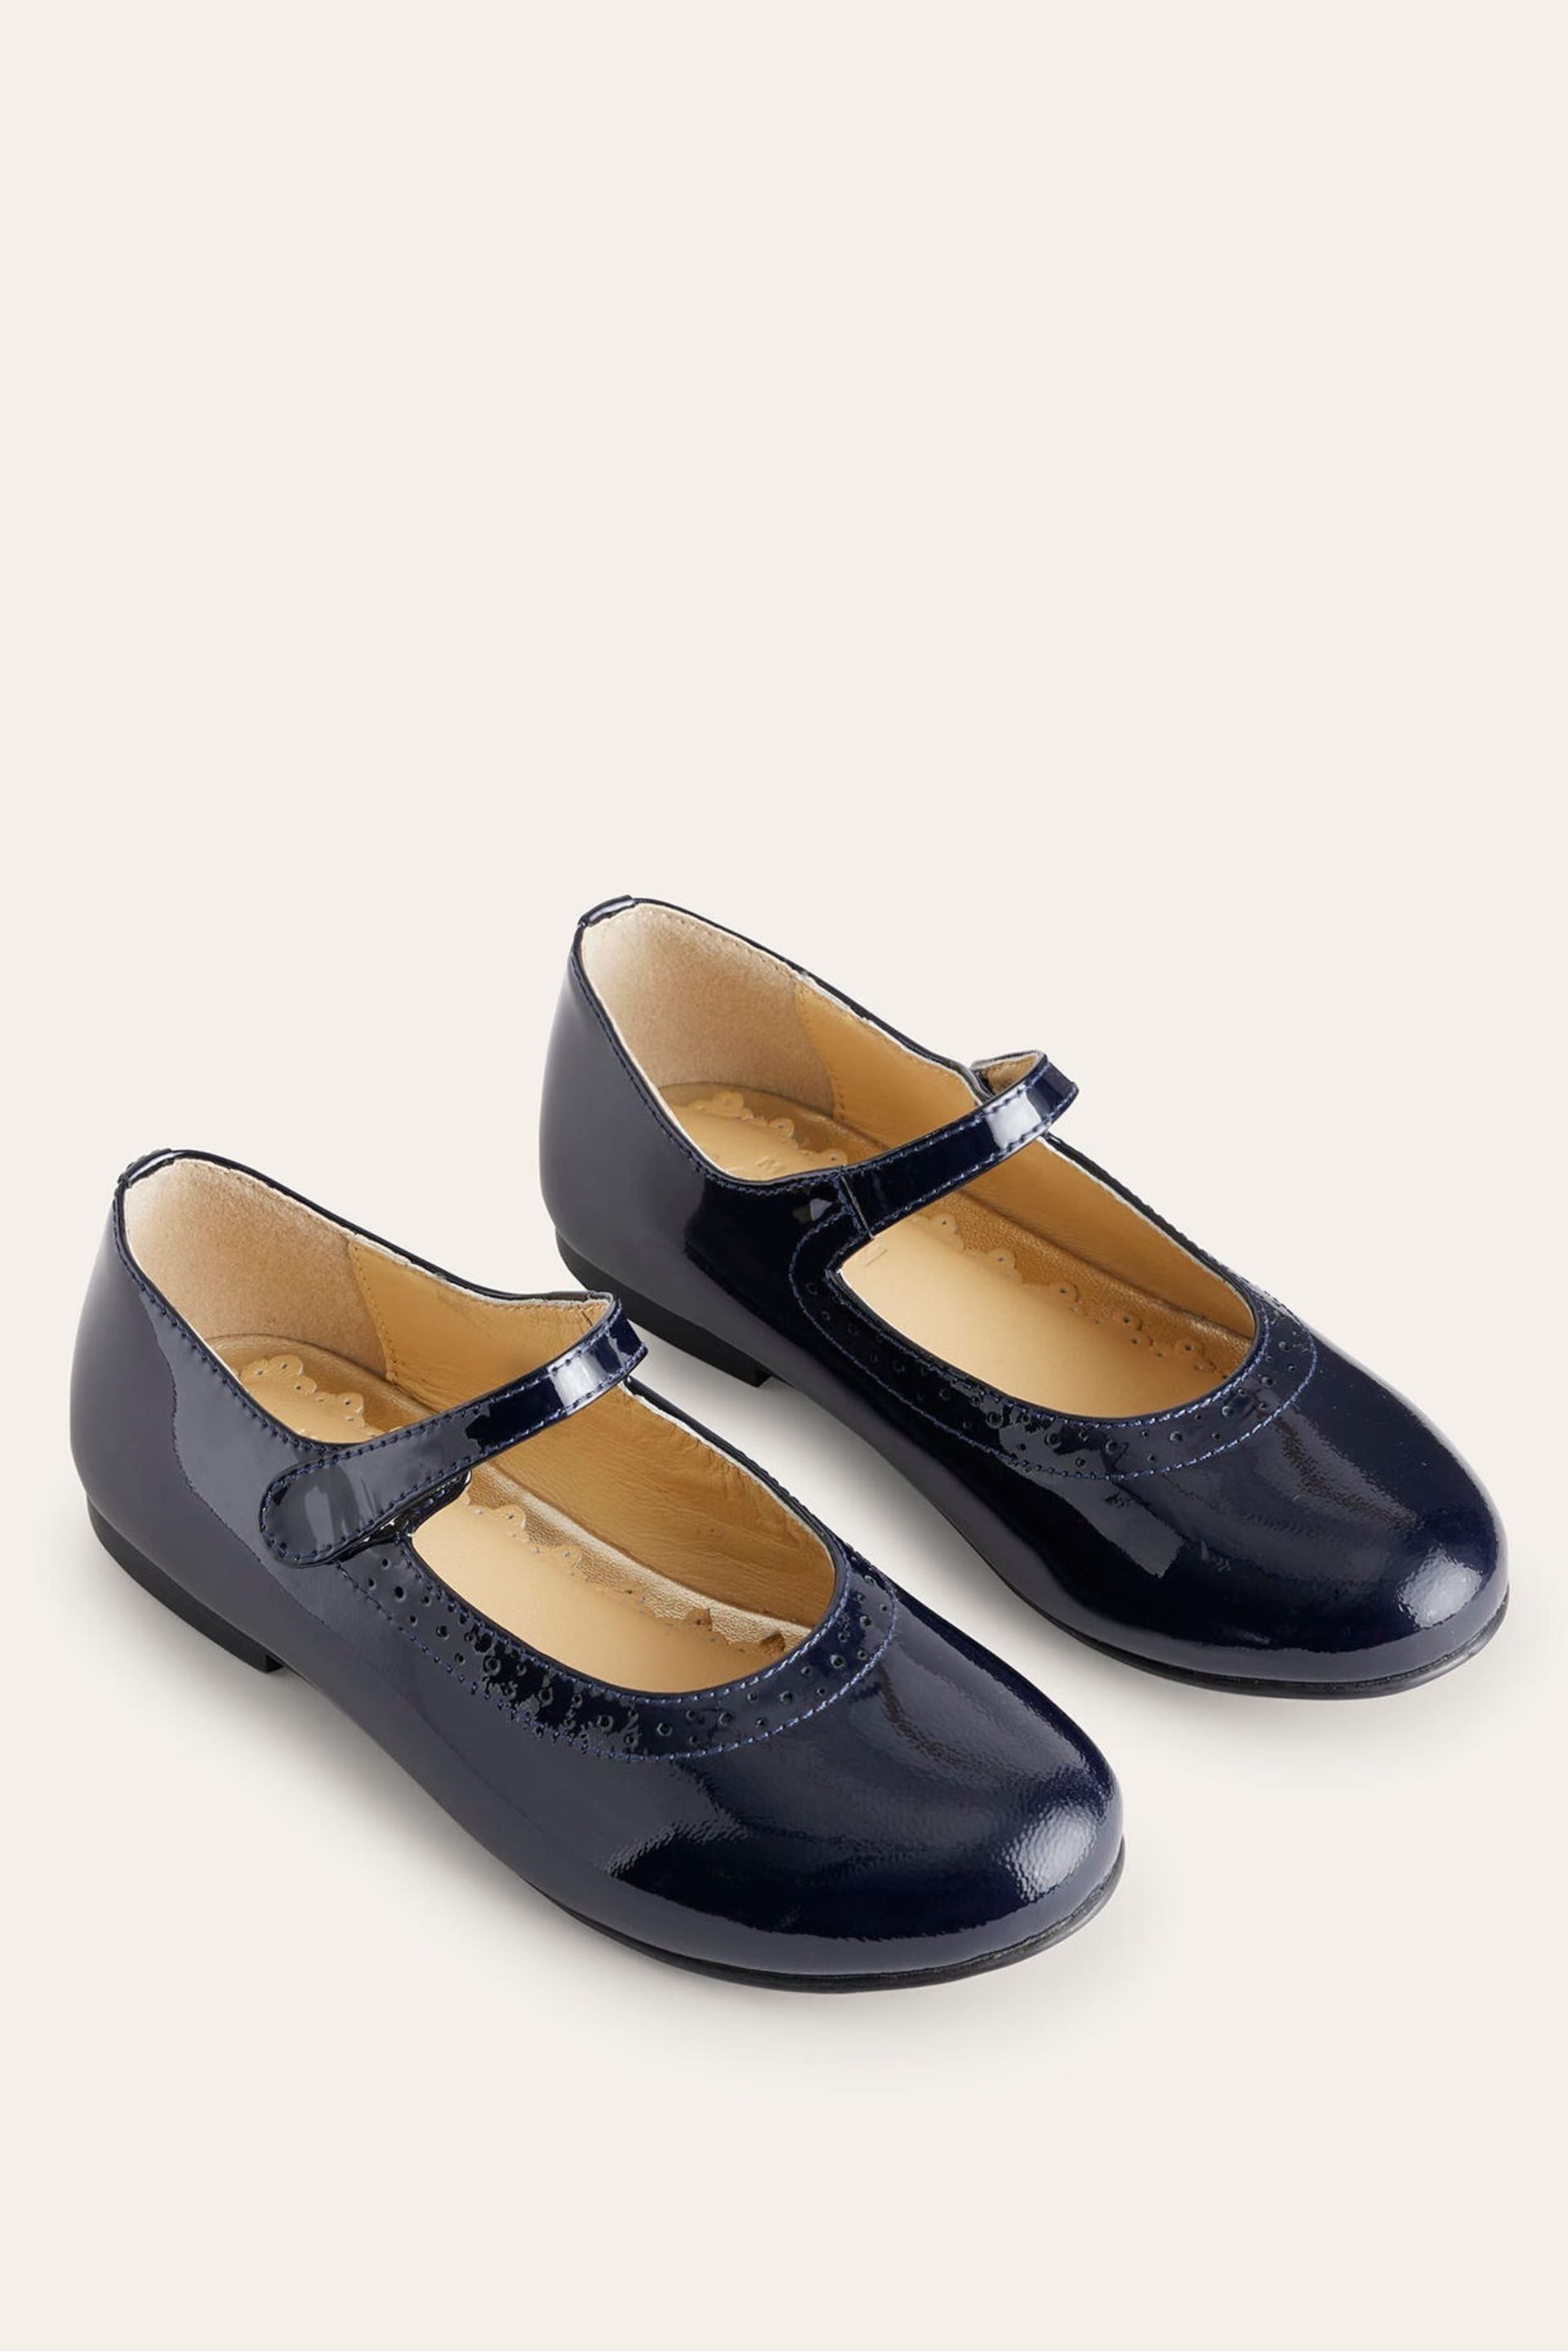 Boden Blue Leather Mary Janes Shoes - Image 2 of 3